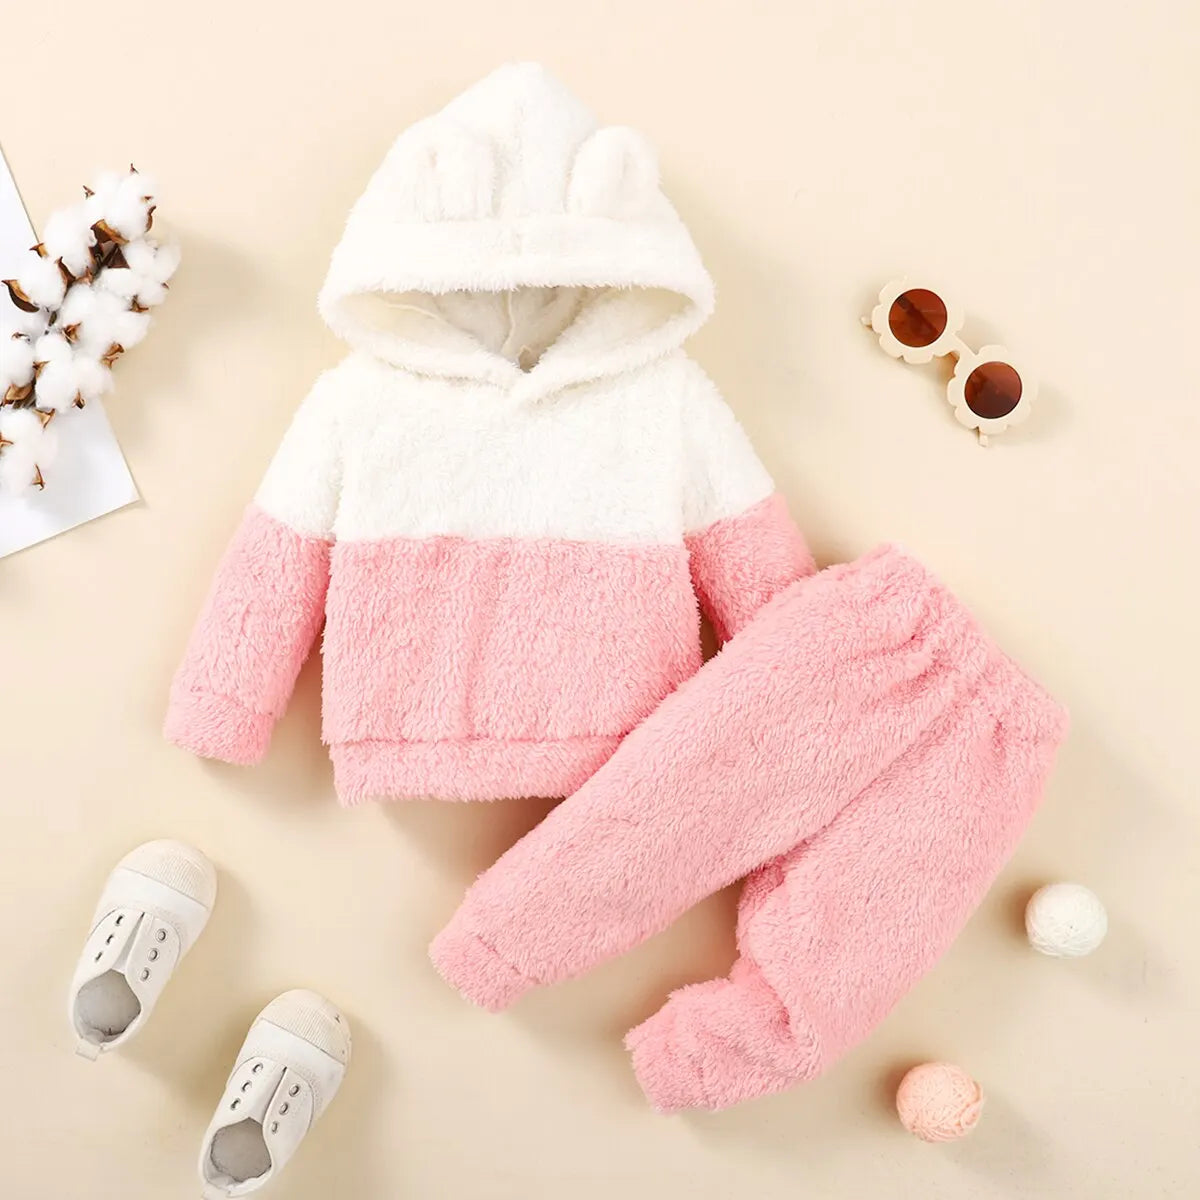 Cute Baby Clothes 3-24 Months Infant Girl Clothing Set Flannel Long Sleeve Hooded Top+Pant Winter Warm Outfit for Toddler Girl